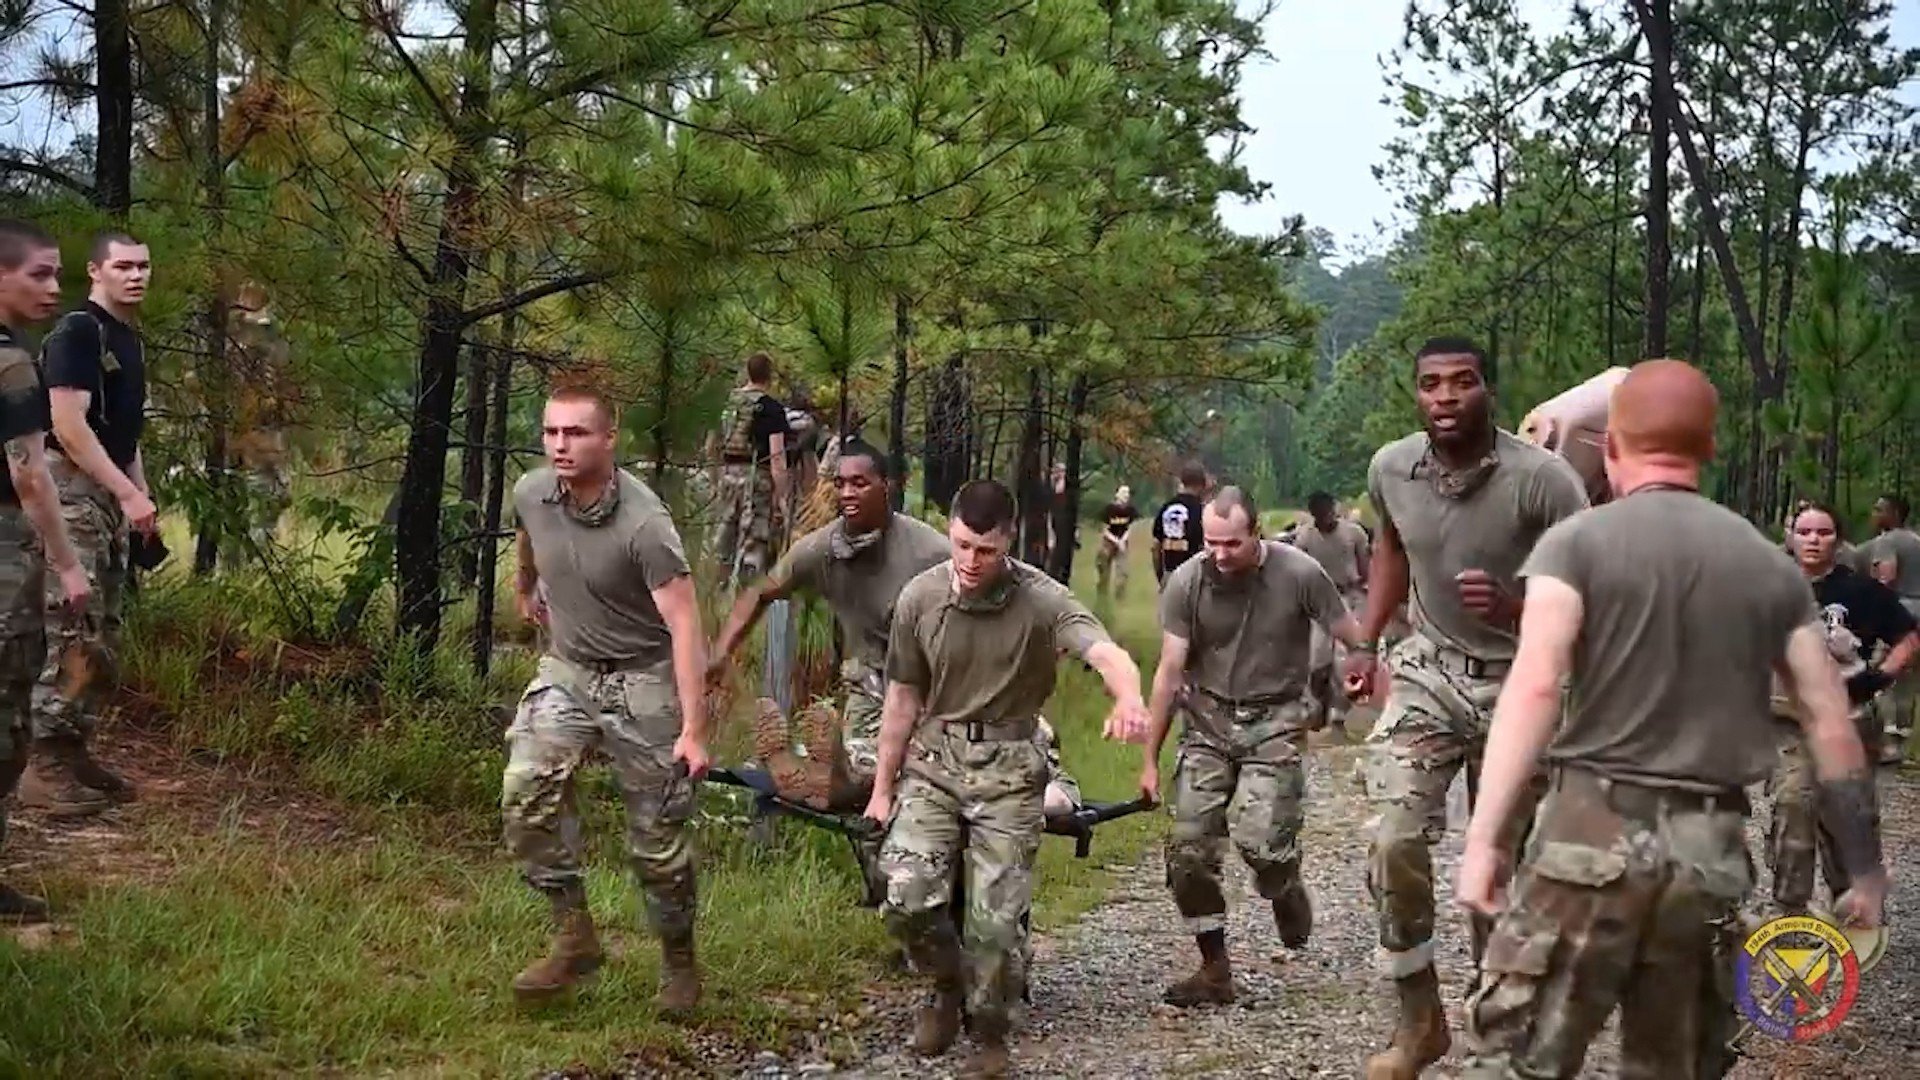 An image from a recent Army video shows recruits starting training here to become cavalry scouts taking part in an event designed to instill teamwork and attention to detail on their first day of training. Called the “Thunder Run,” the event replaces the traditional “shark attack” in which drill sergeants swarmed newly arrived trainees and shouted orders and belittling comments to gain immediate compliance. The 194th Armored Brigade, which trains the Army’s armor crewmen and cavalry scouts, adopted the Thunder Run several months ago as a replacement for the shark attack, which had come to be viewed as an outmoded vestige of the Vietnam-era military draft. Army photo